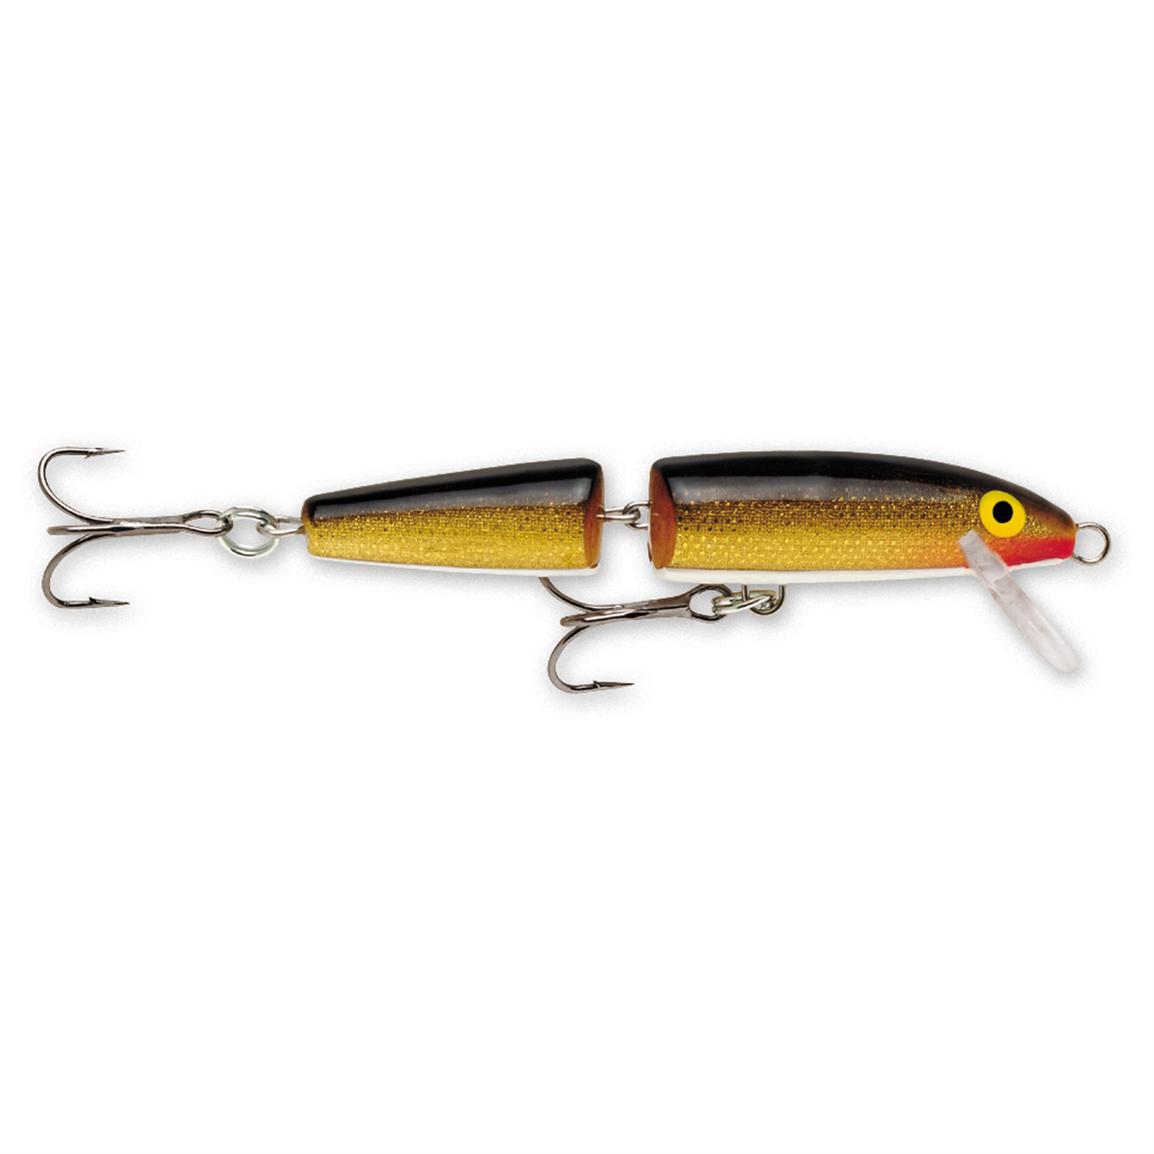 rapala-jointed-minnow-lure-294216-crank-baits-at-sportsman-s-guide